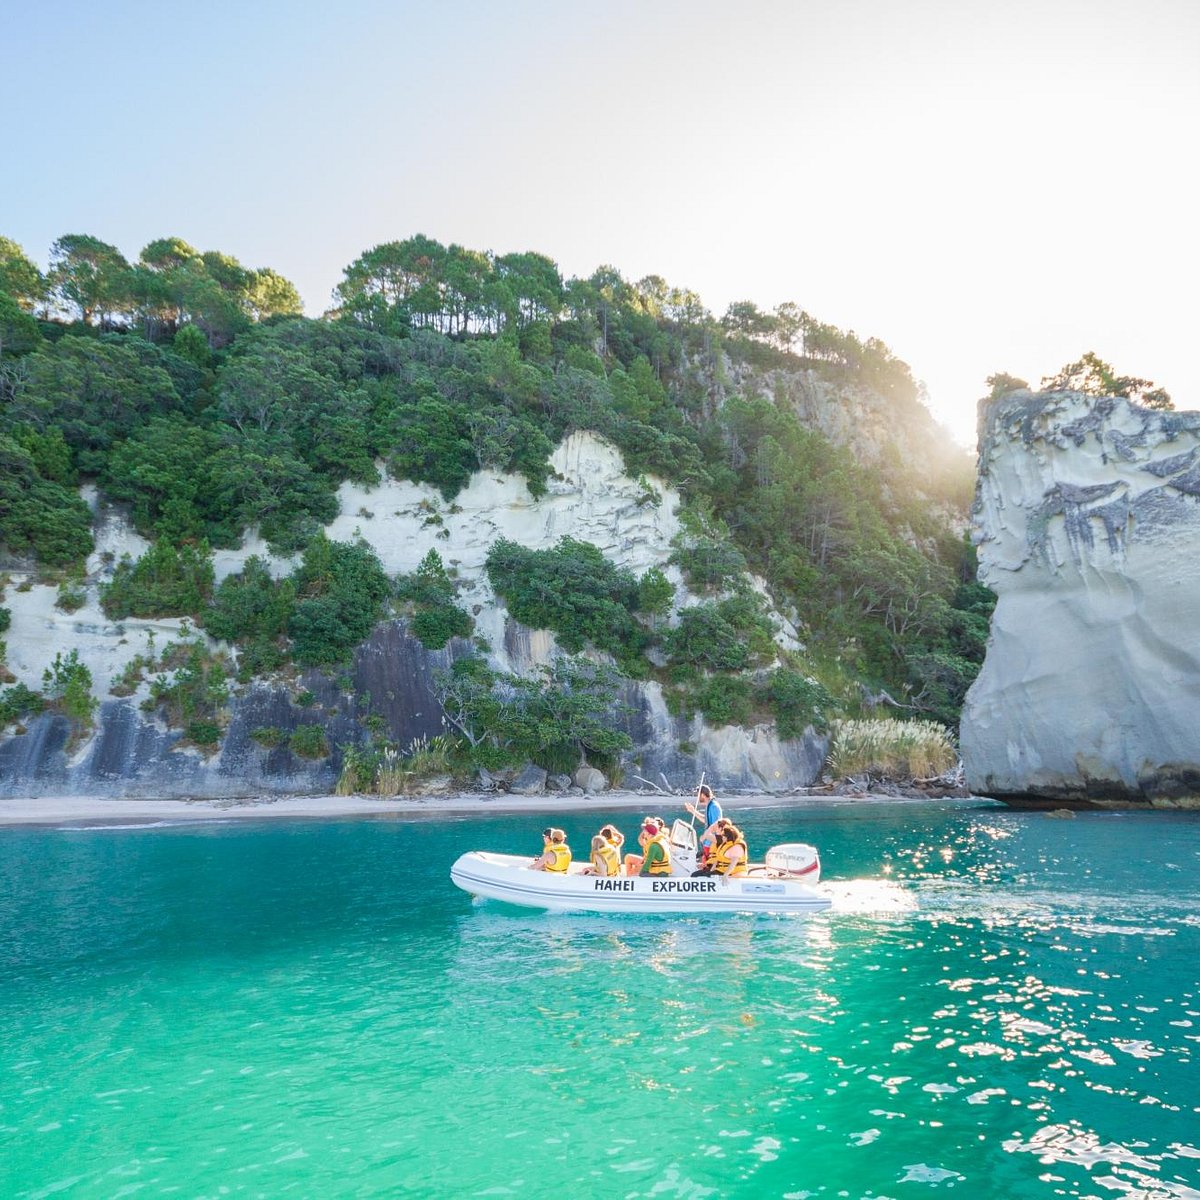 cathedral cove boat tour reviews